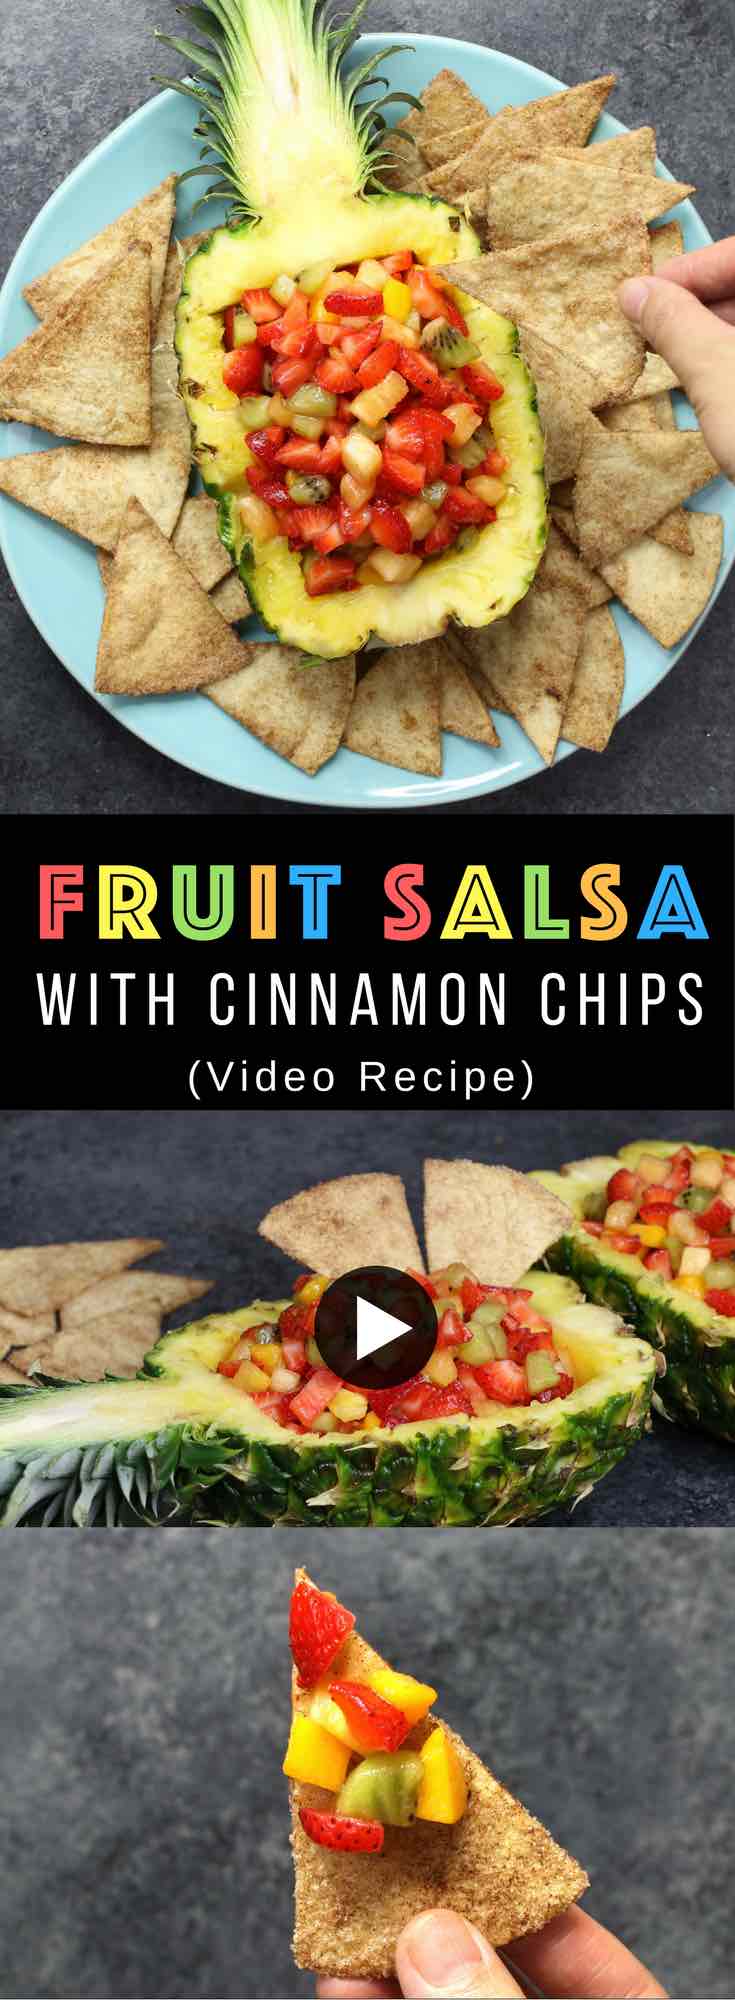 Fruit Salsa With Cinnamon Chips - a healthy appetizer or snack to make for a parties, barbecues and holidays. Serve with crispy cinnamon chips. Ready in 15 minutes! #fruitsalsa 